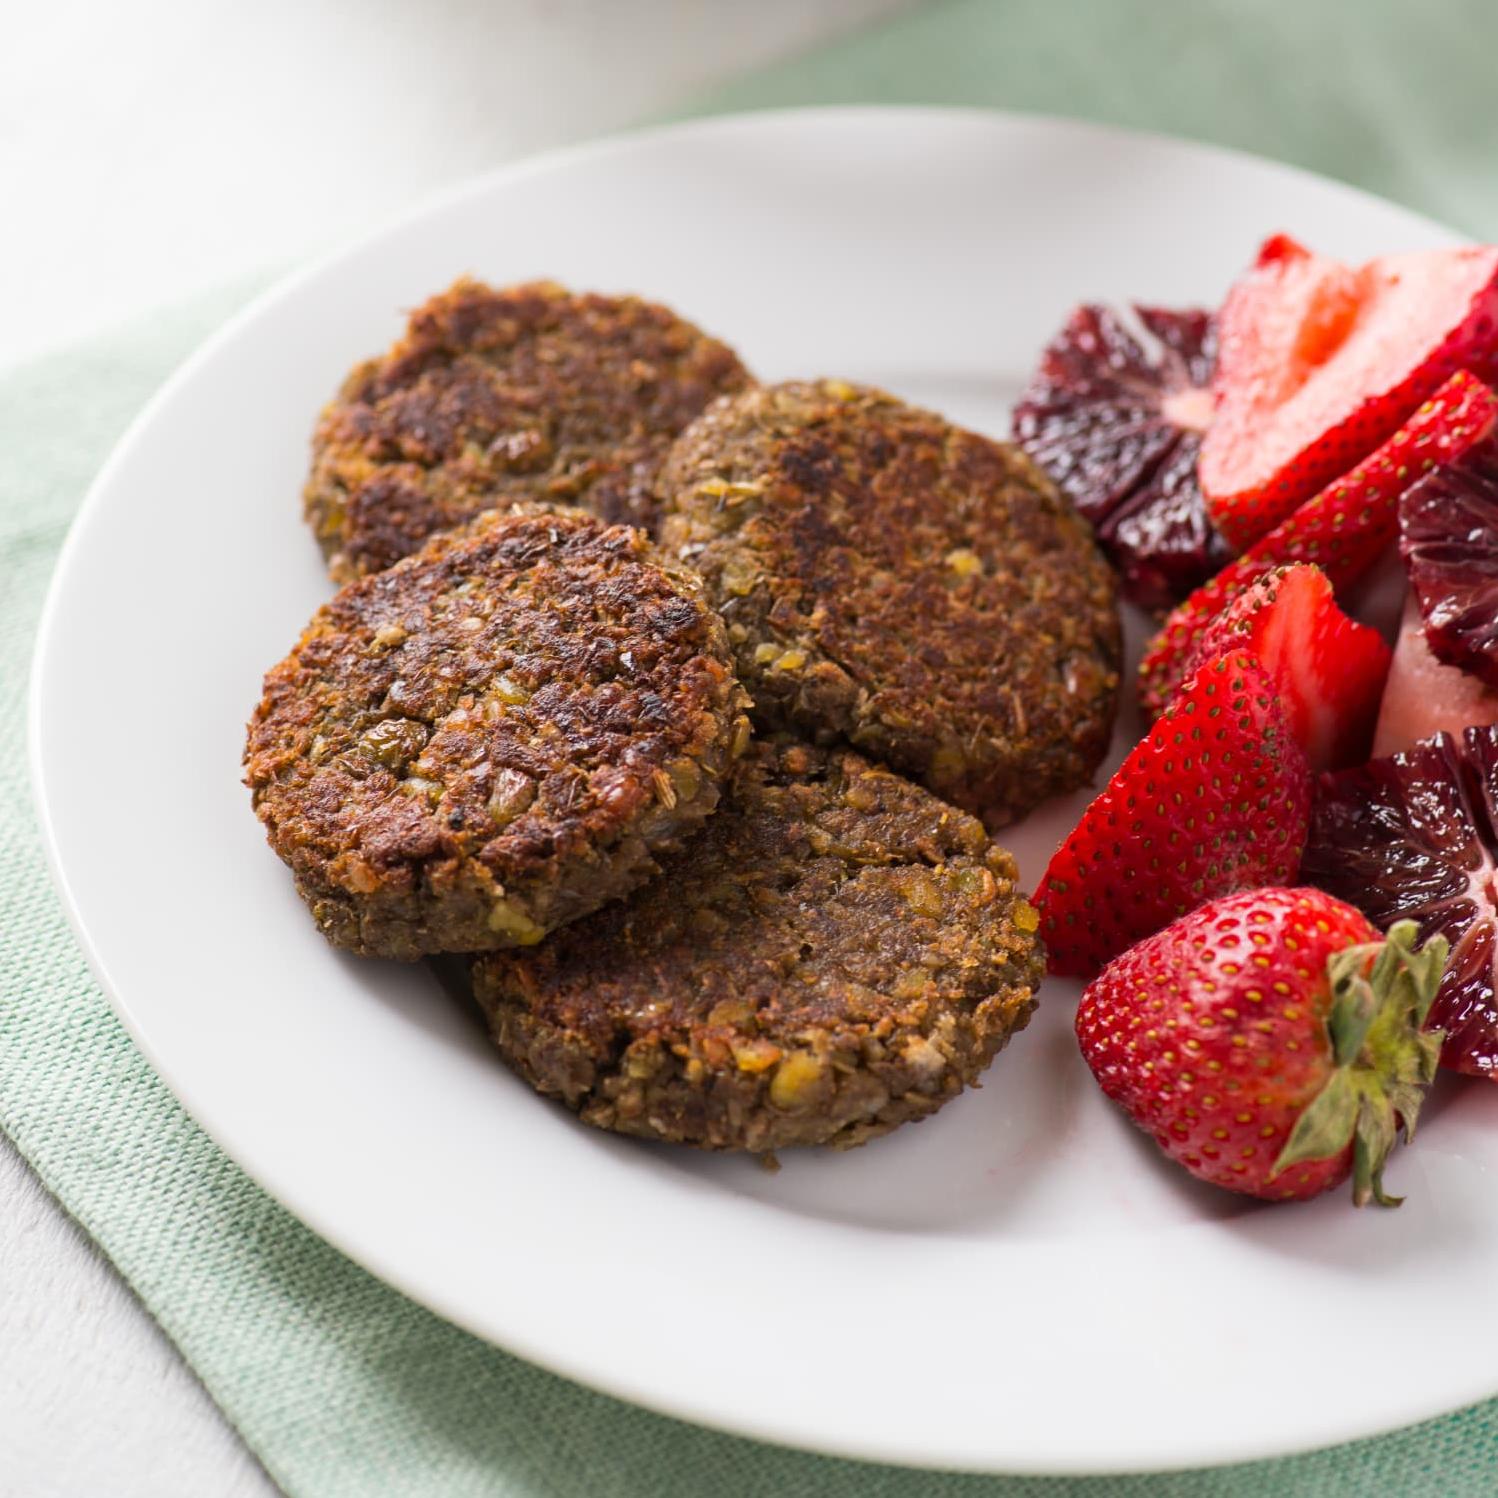 Sizzle up your taste buds with vegetarian sausage patties